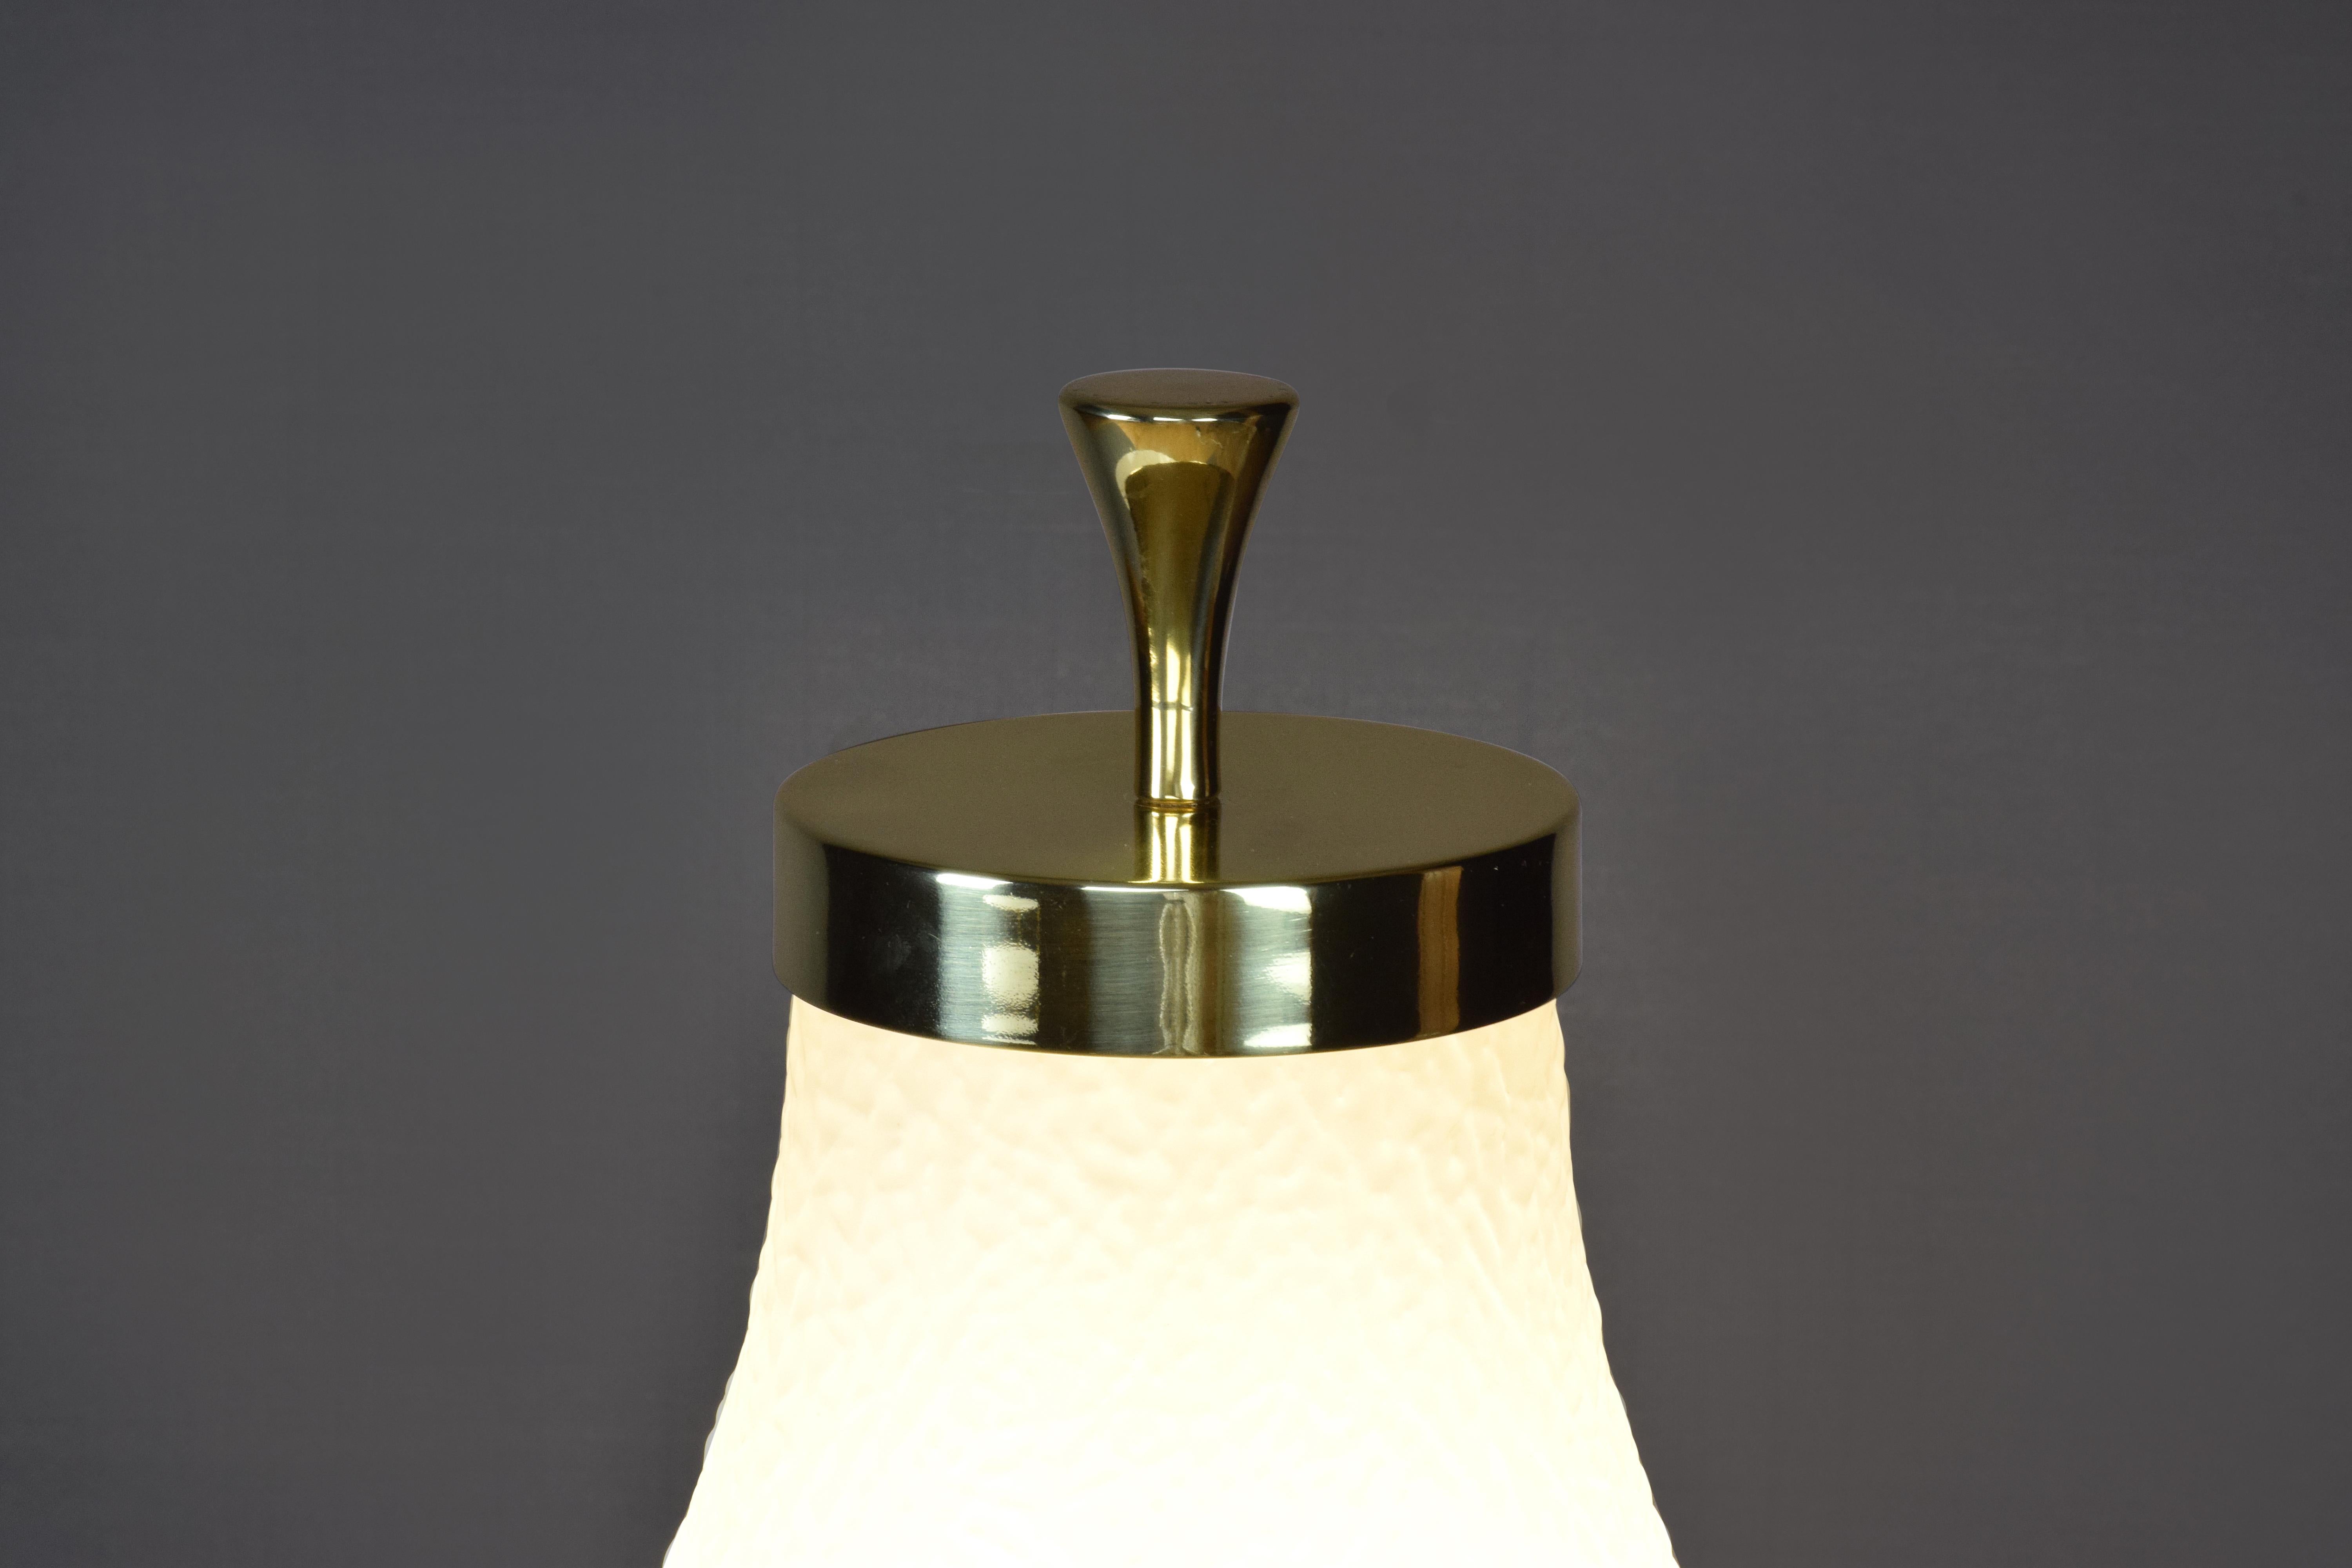 Portuguese Org-t1 Glass and Brass Table Lamp, Flow 2 Collection